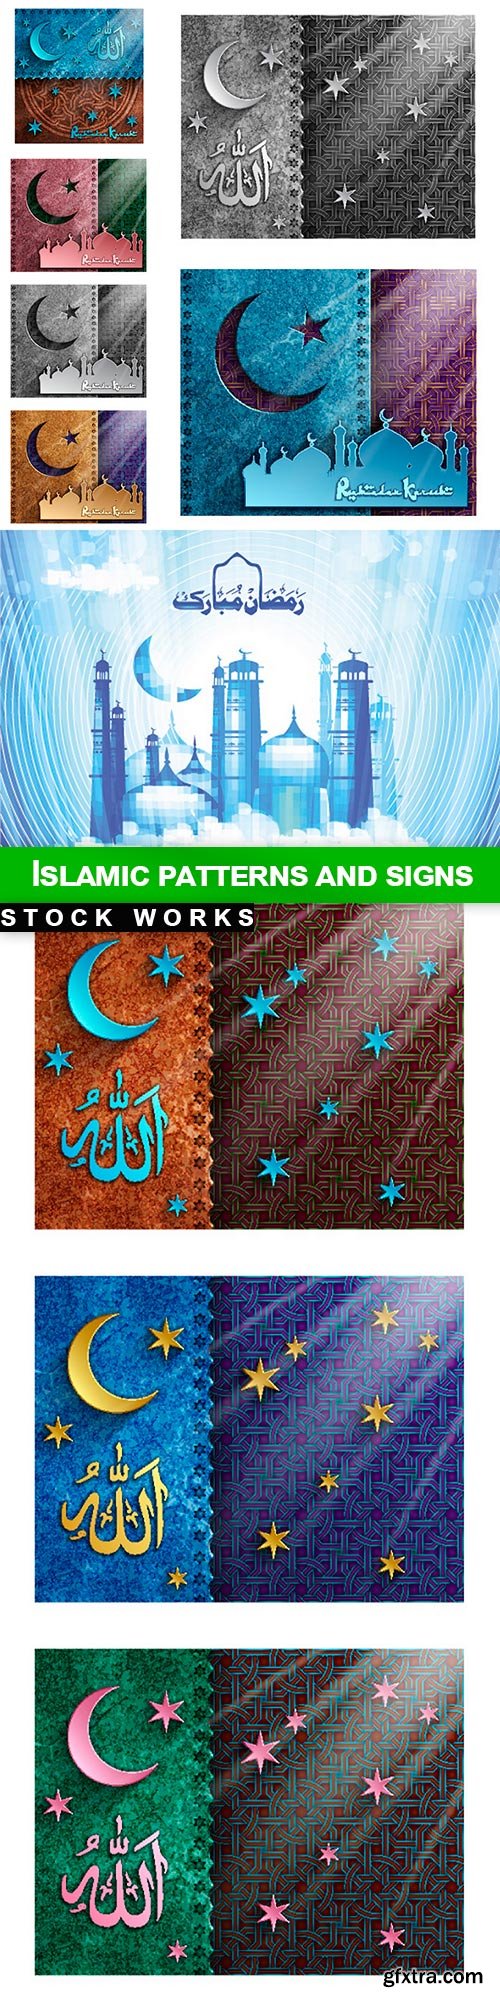 Islamic patterns and signs - 10 EPS